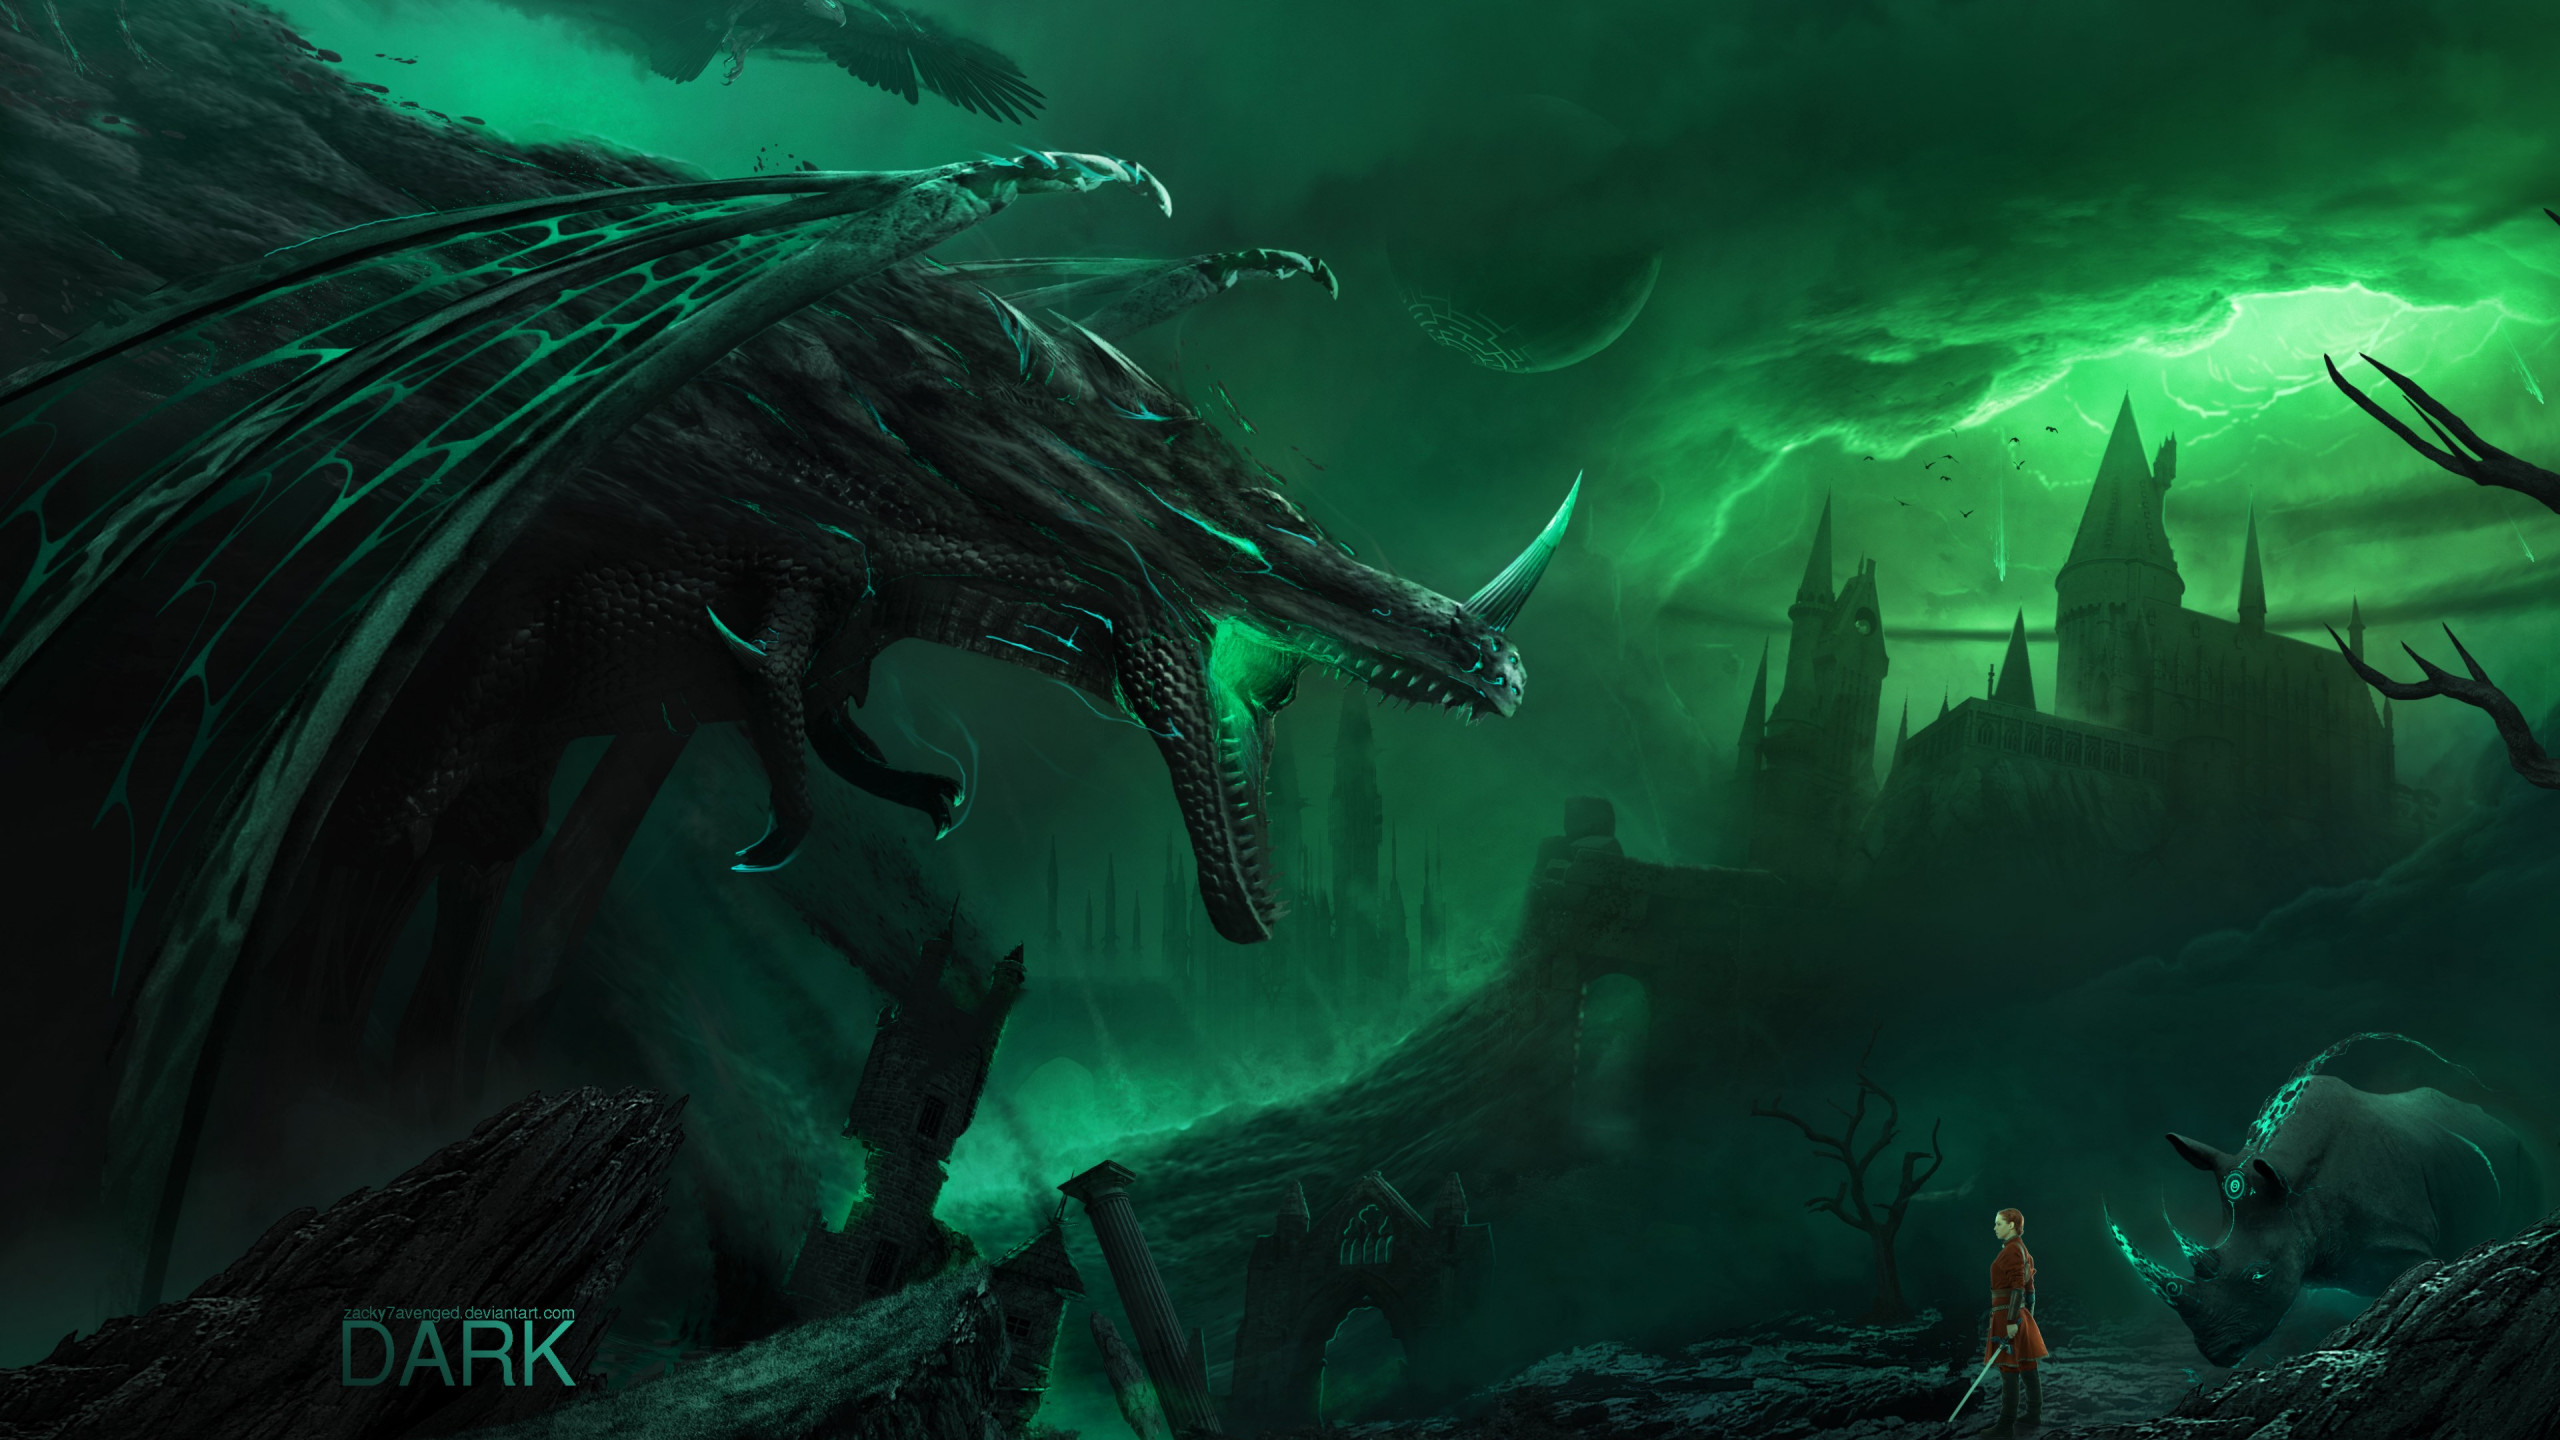 The dark creatures are coming wallpaper 2560x1440